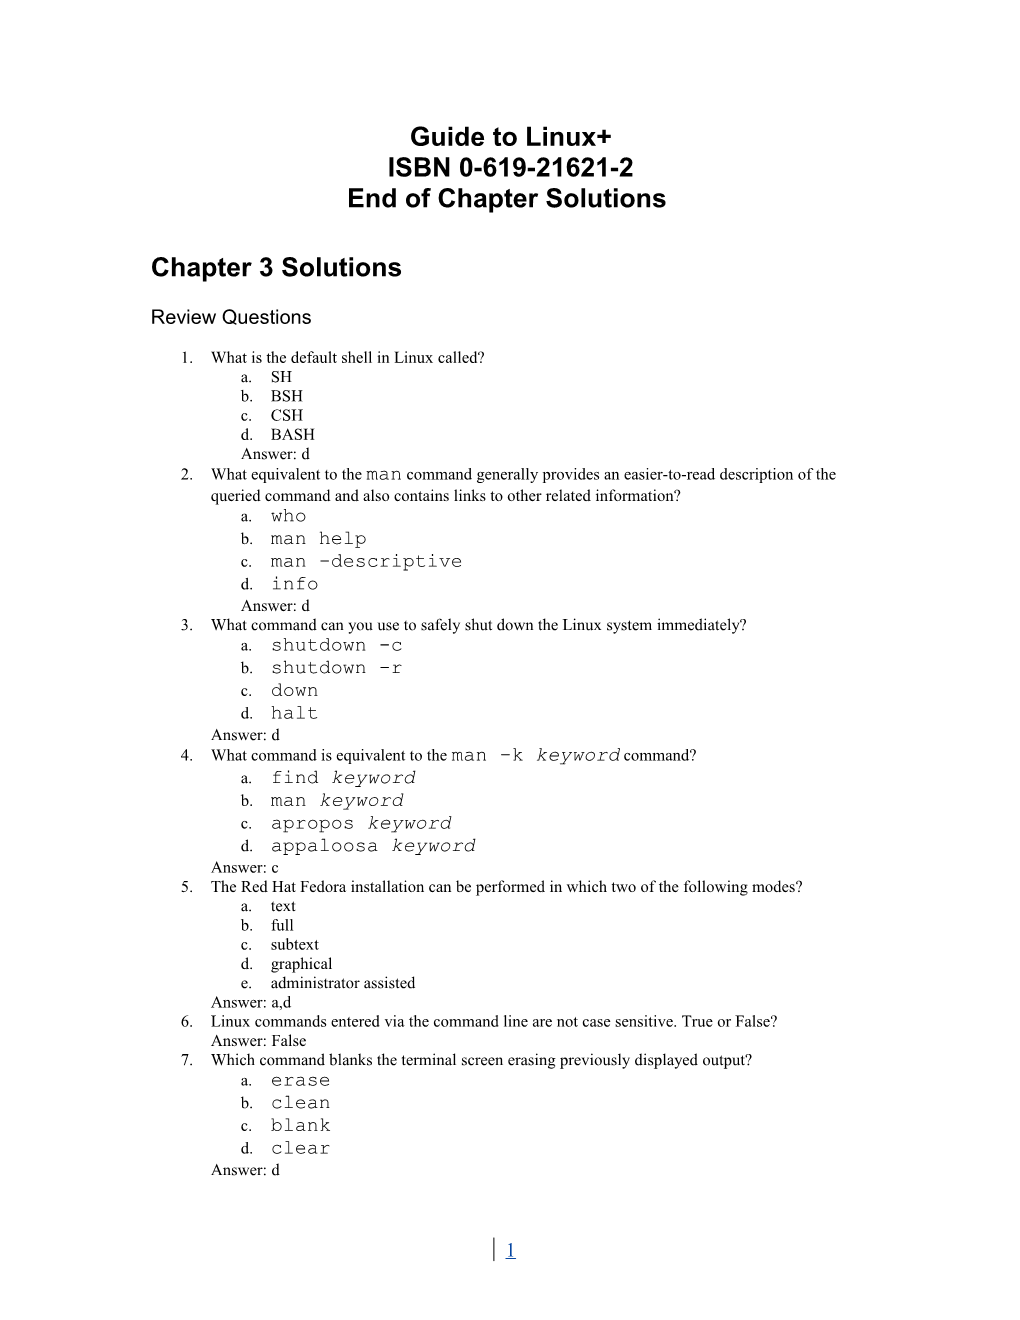 End of Chapter Solutions Template s8